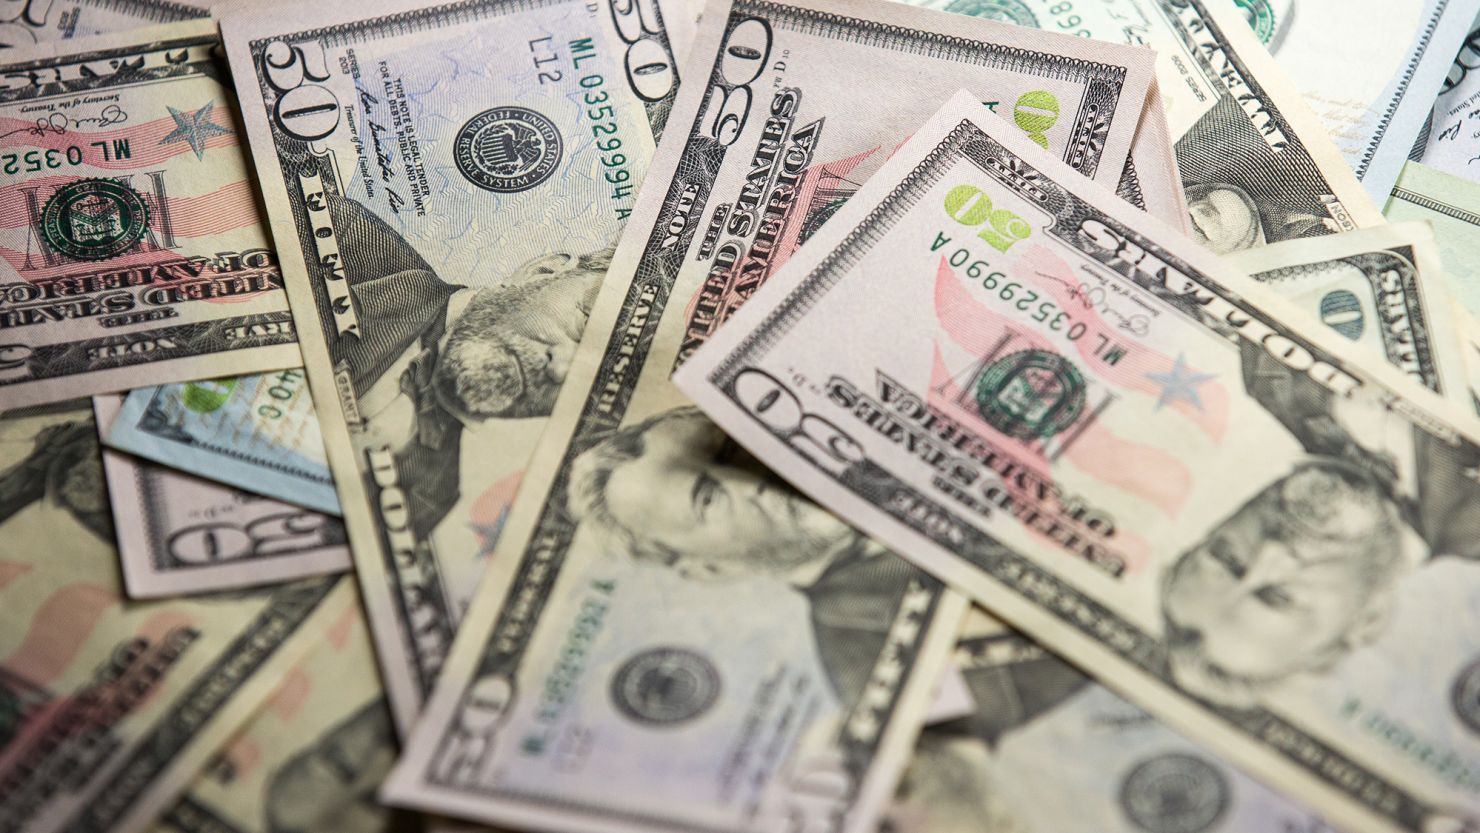 A record number of $50 bills were printed last year. It's not why you think